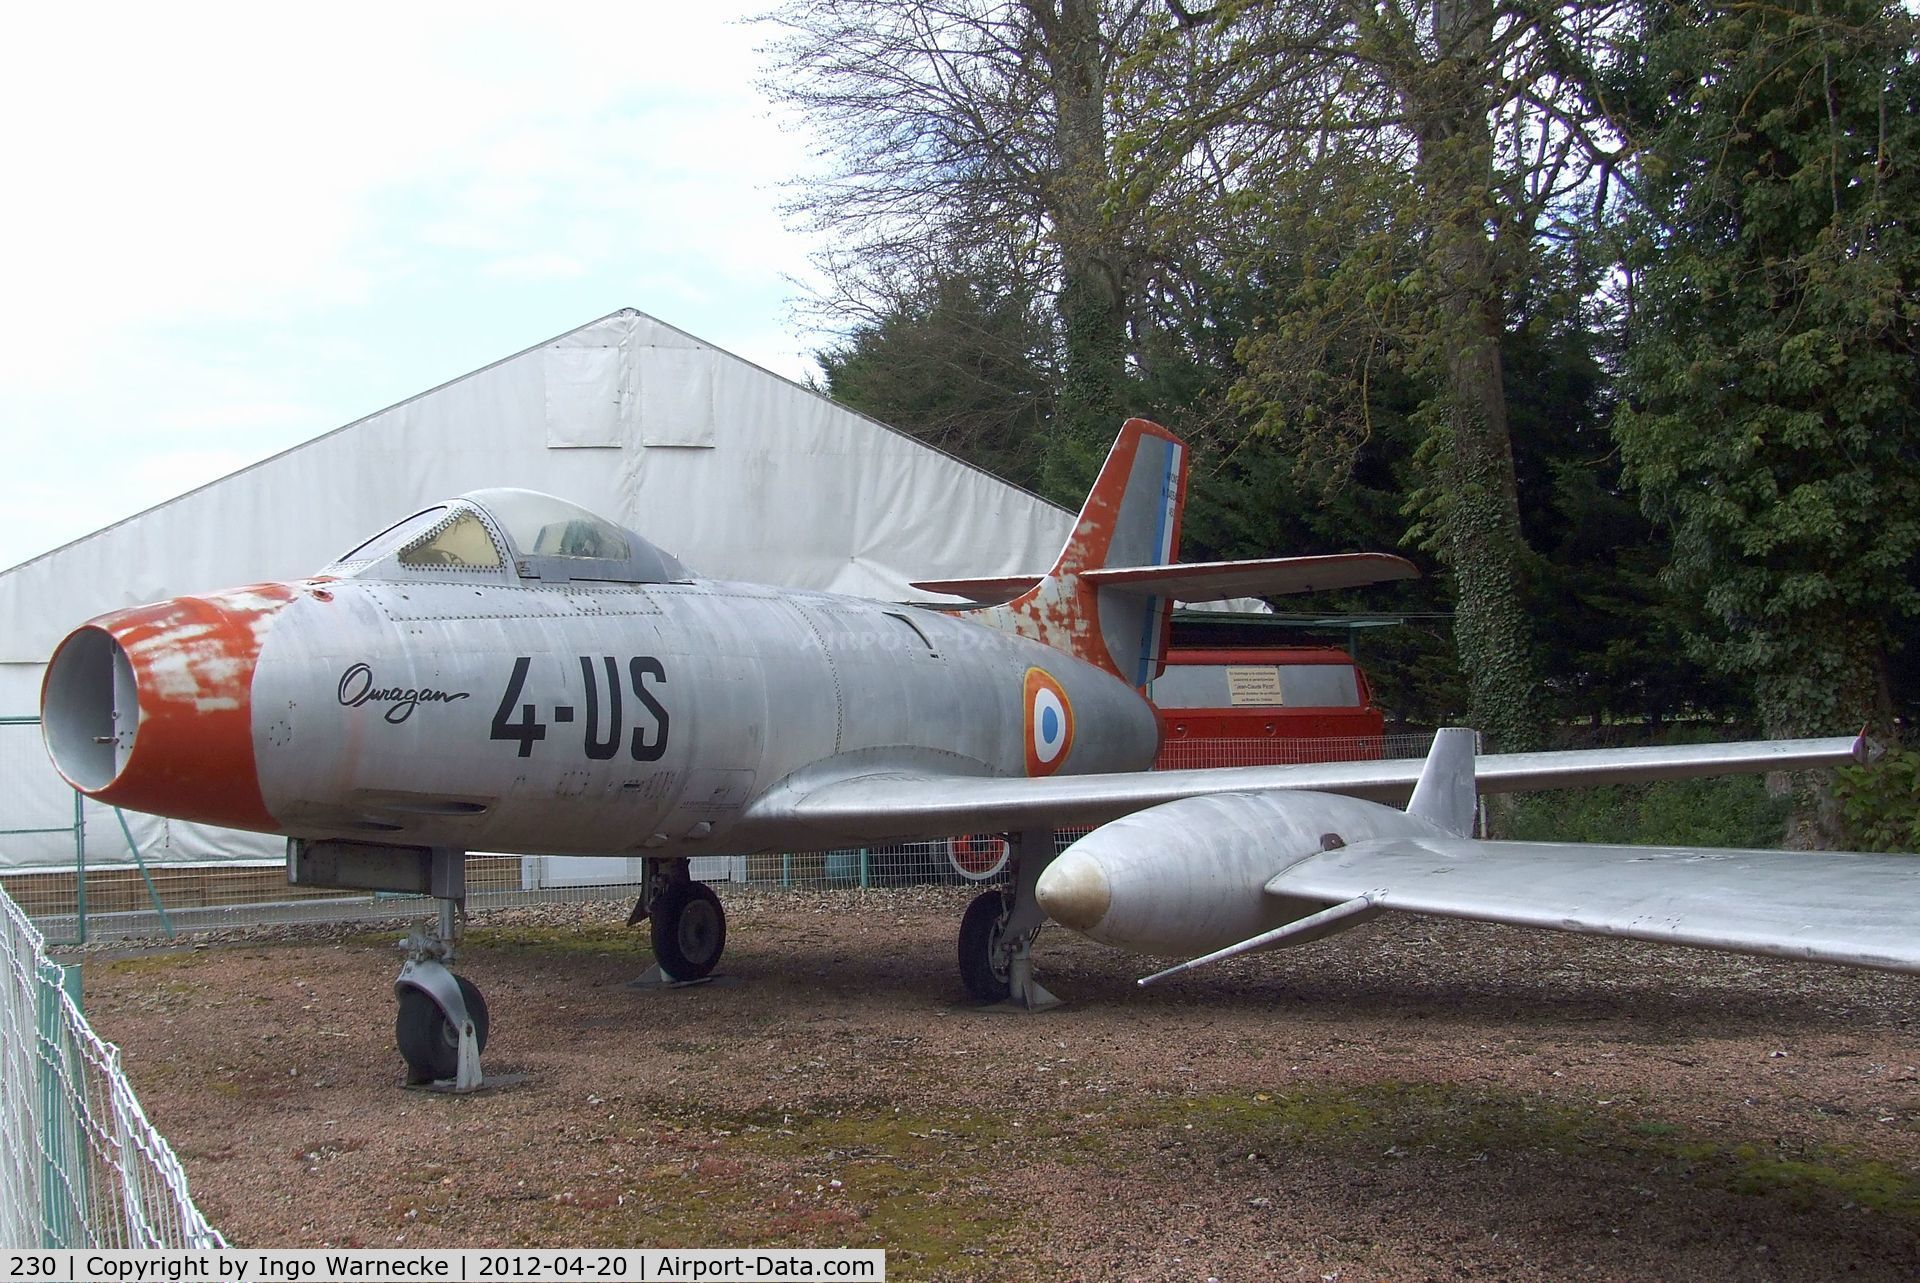 230, Dassault MD-450 Ouragan C/N 230, Dassault MD.450 Ouragan at the Musee de l'Aviation du Chateau, Savigny-les-Beaune